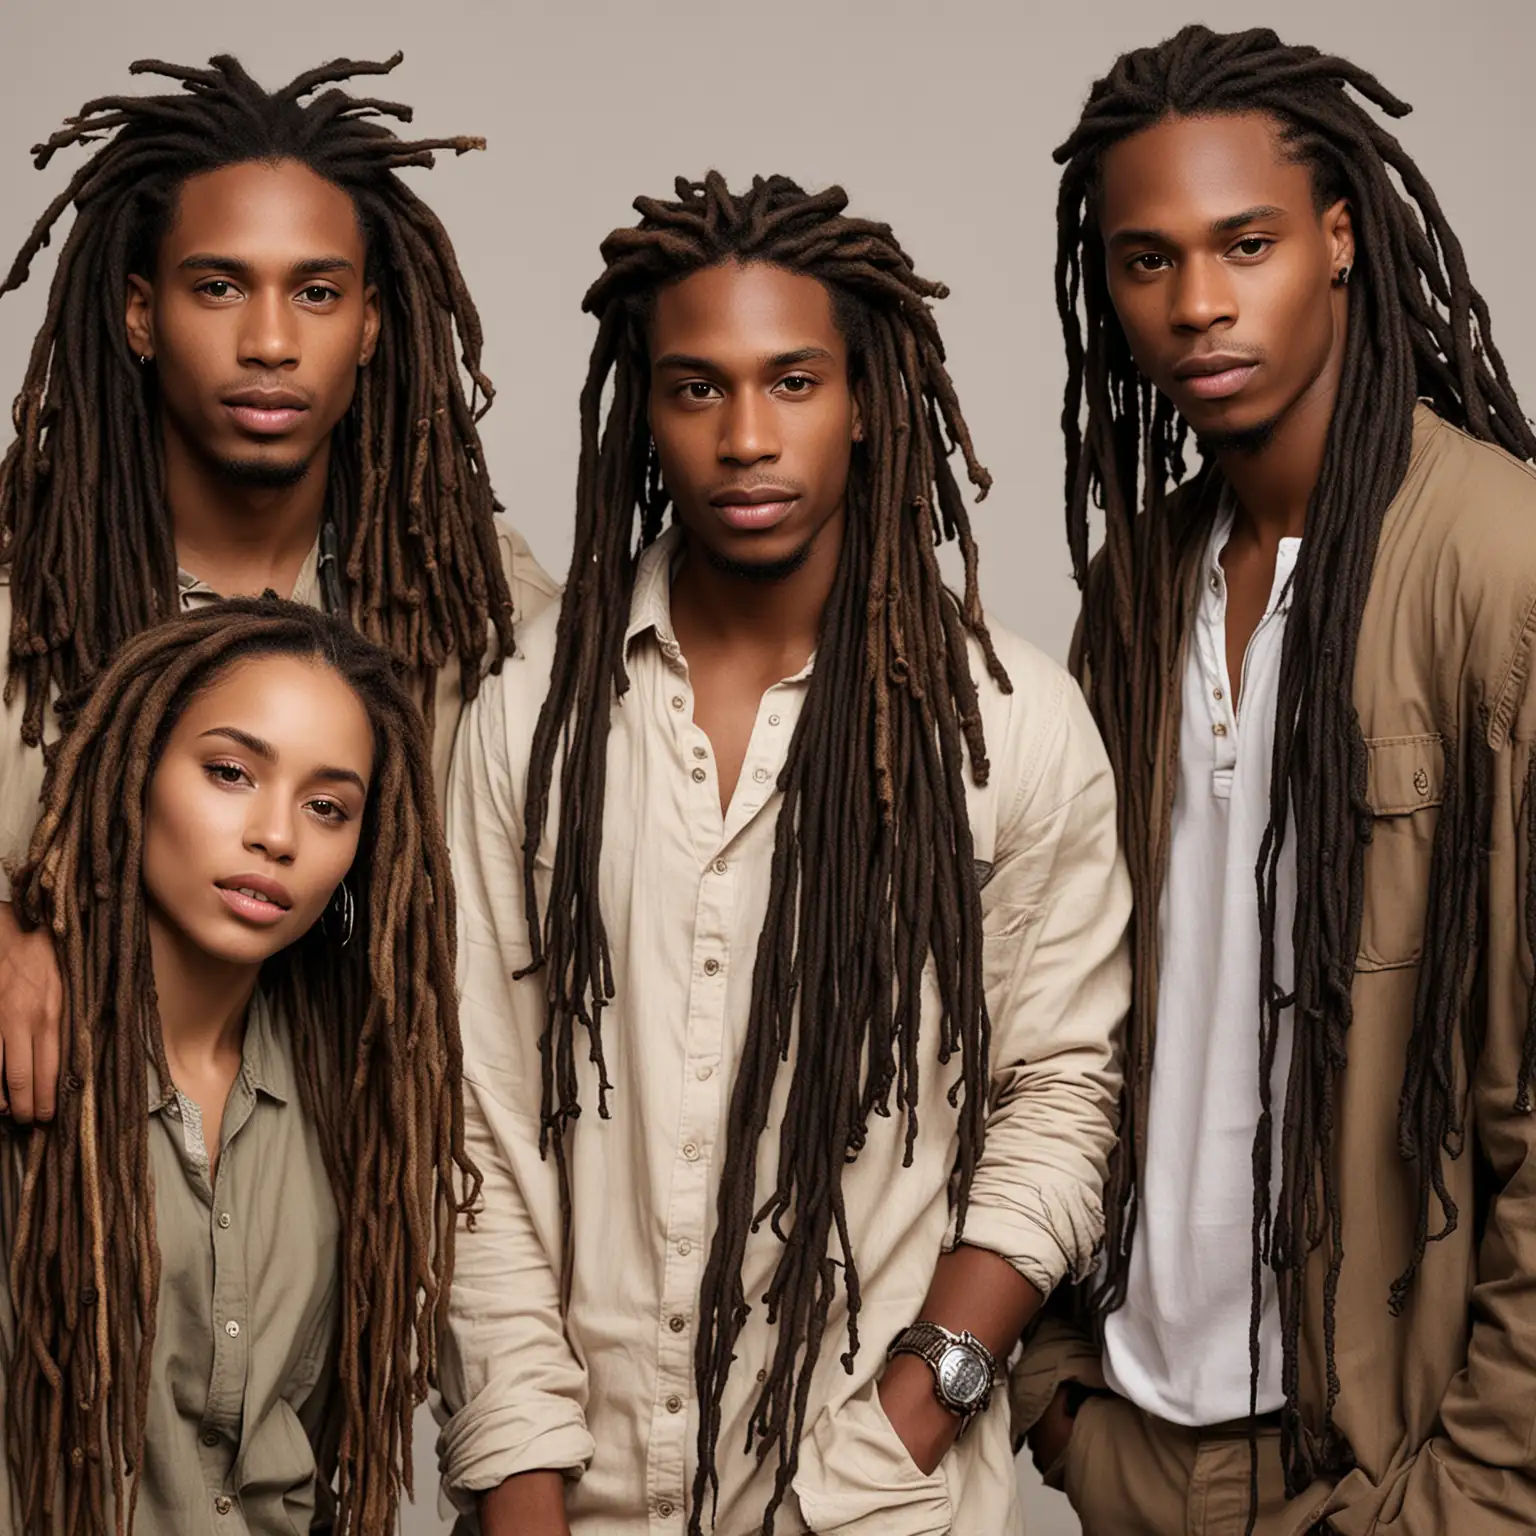 4 BEAUTIFUL AFRICAN AMERICAN MODELS MEN AND WOMEN WITH DREAD LOCS, NETRUAL LOOK, LONG DREADS,  PROFESSIONAL PHOTOSHOOT
